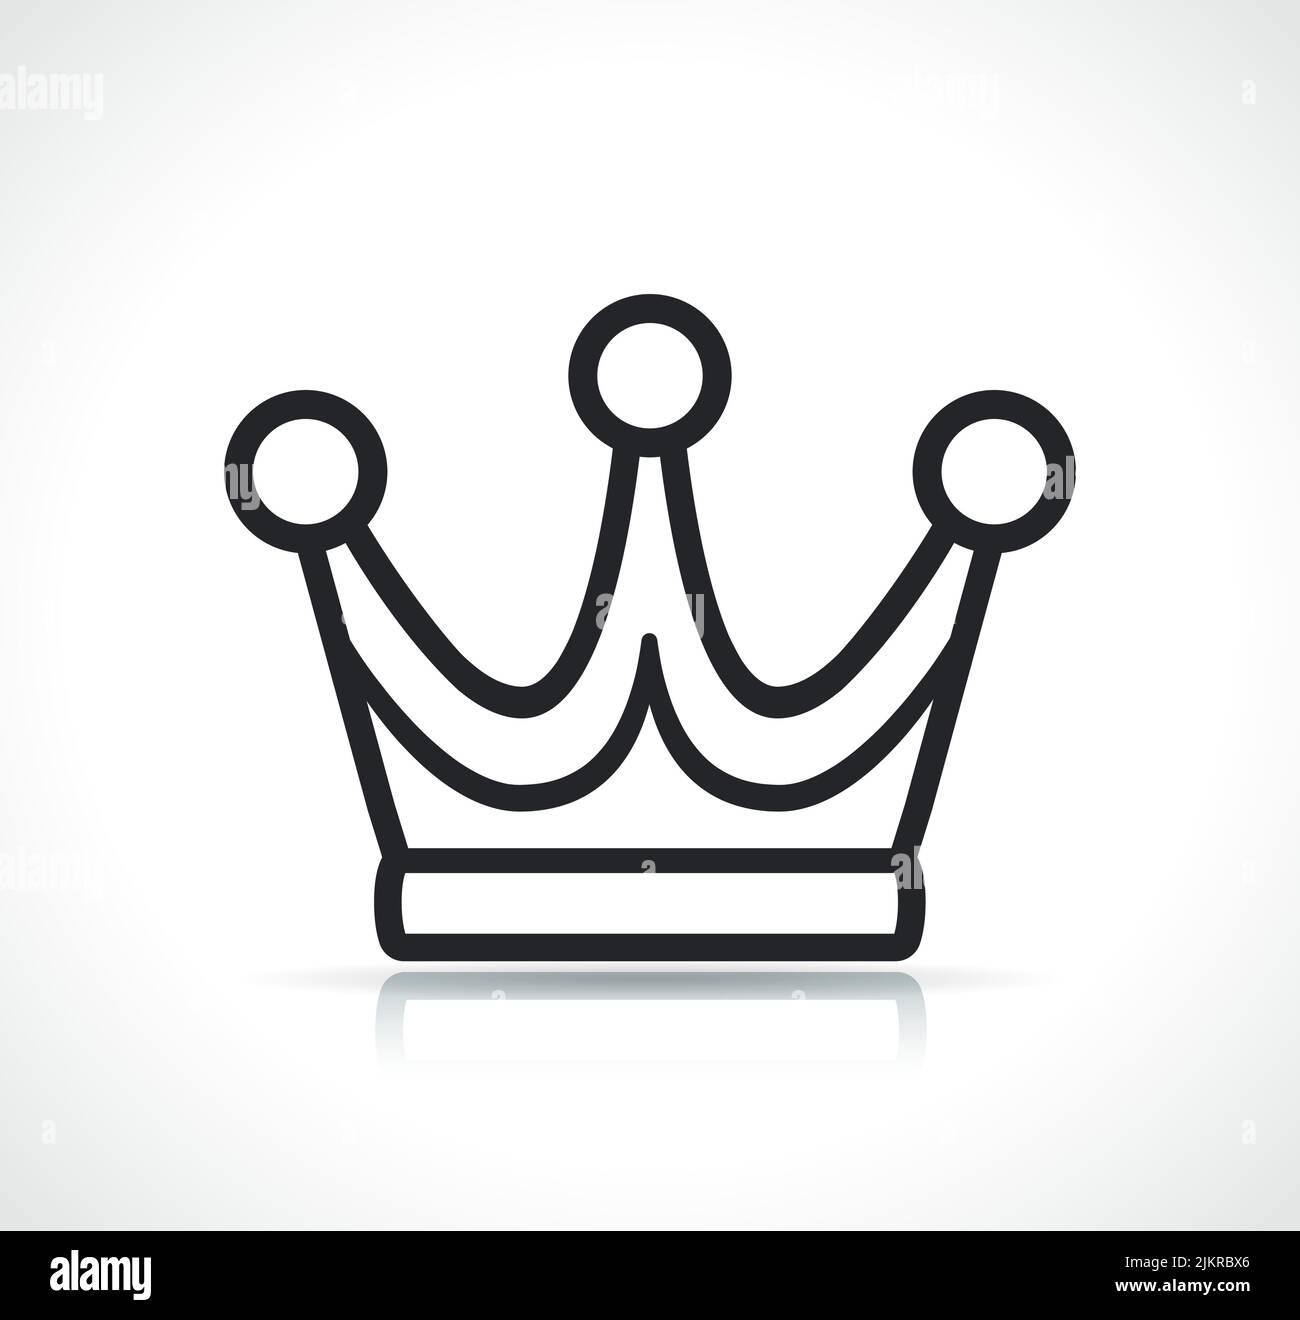 crown or royal thin line icon isolated Stock Vector